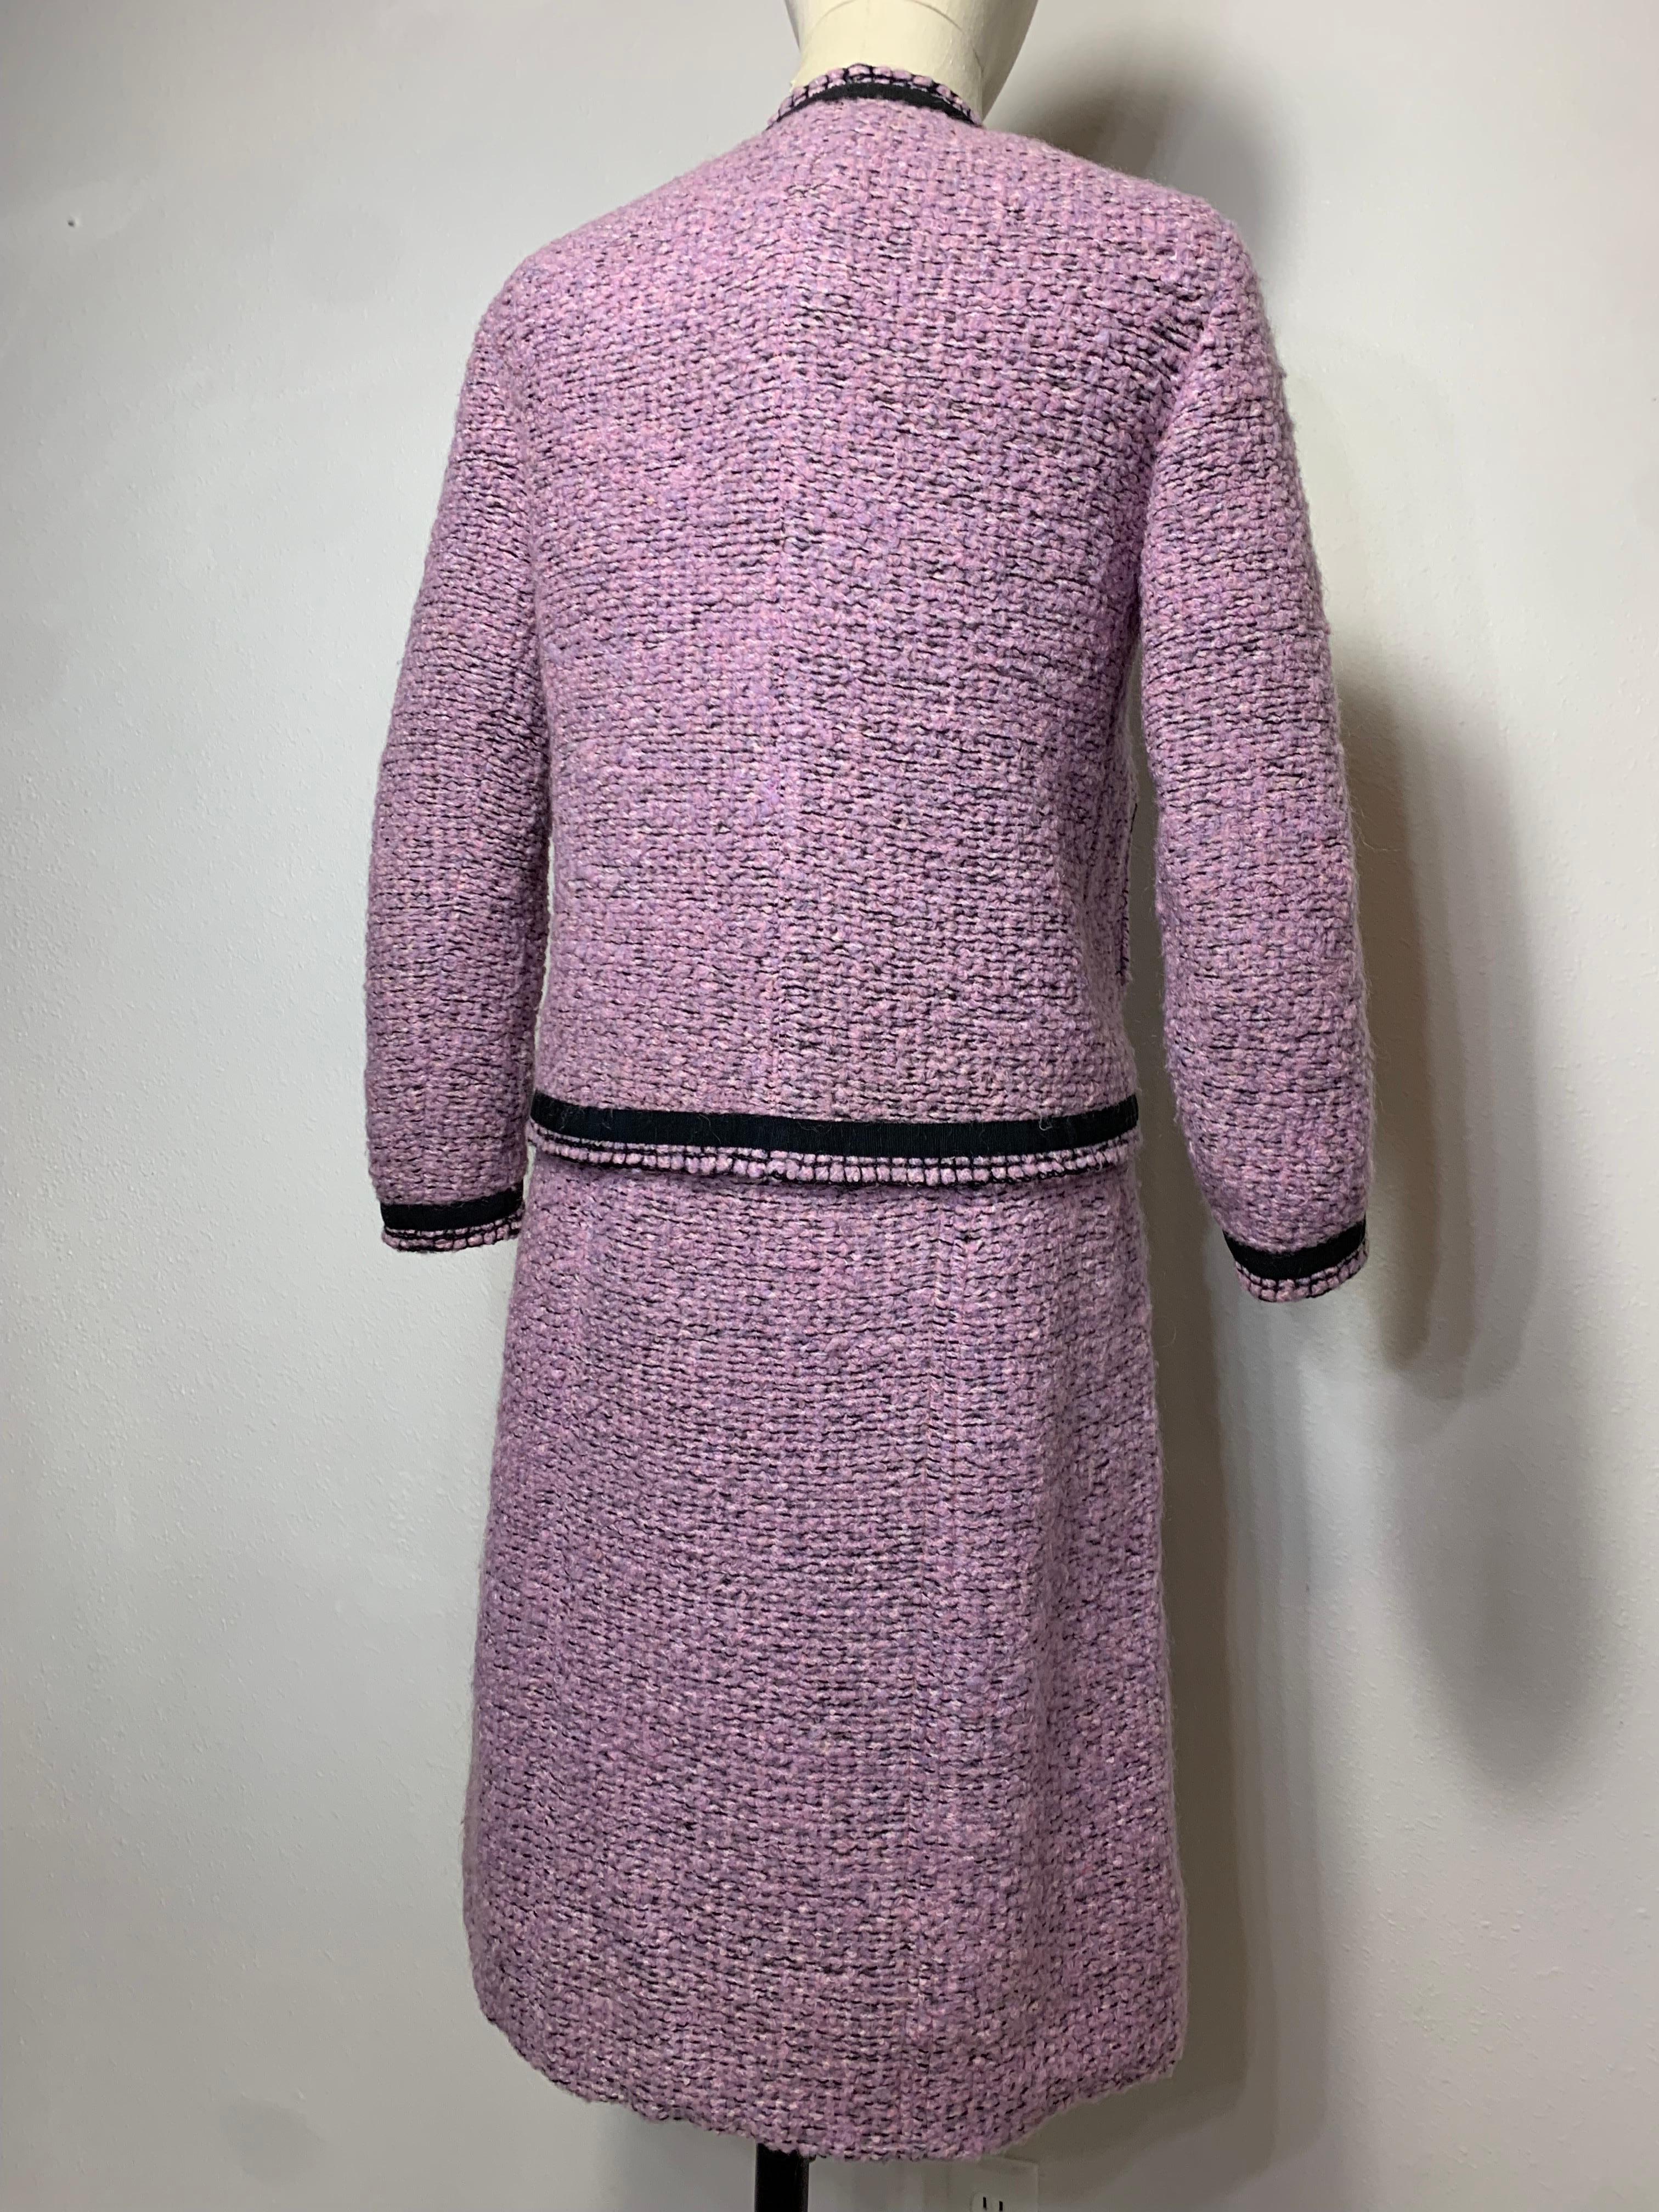 1960 Autumn/Winter Chanel Haute Couture Documented Lavender Tweed Skirt Suit  For Sale 6